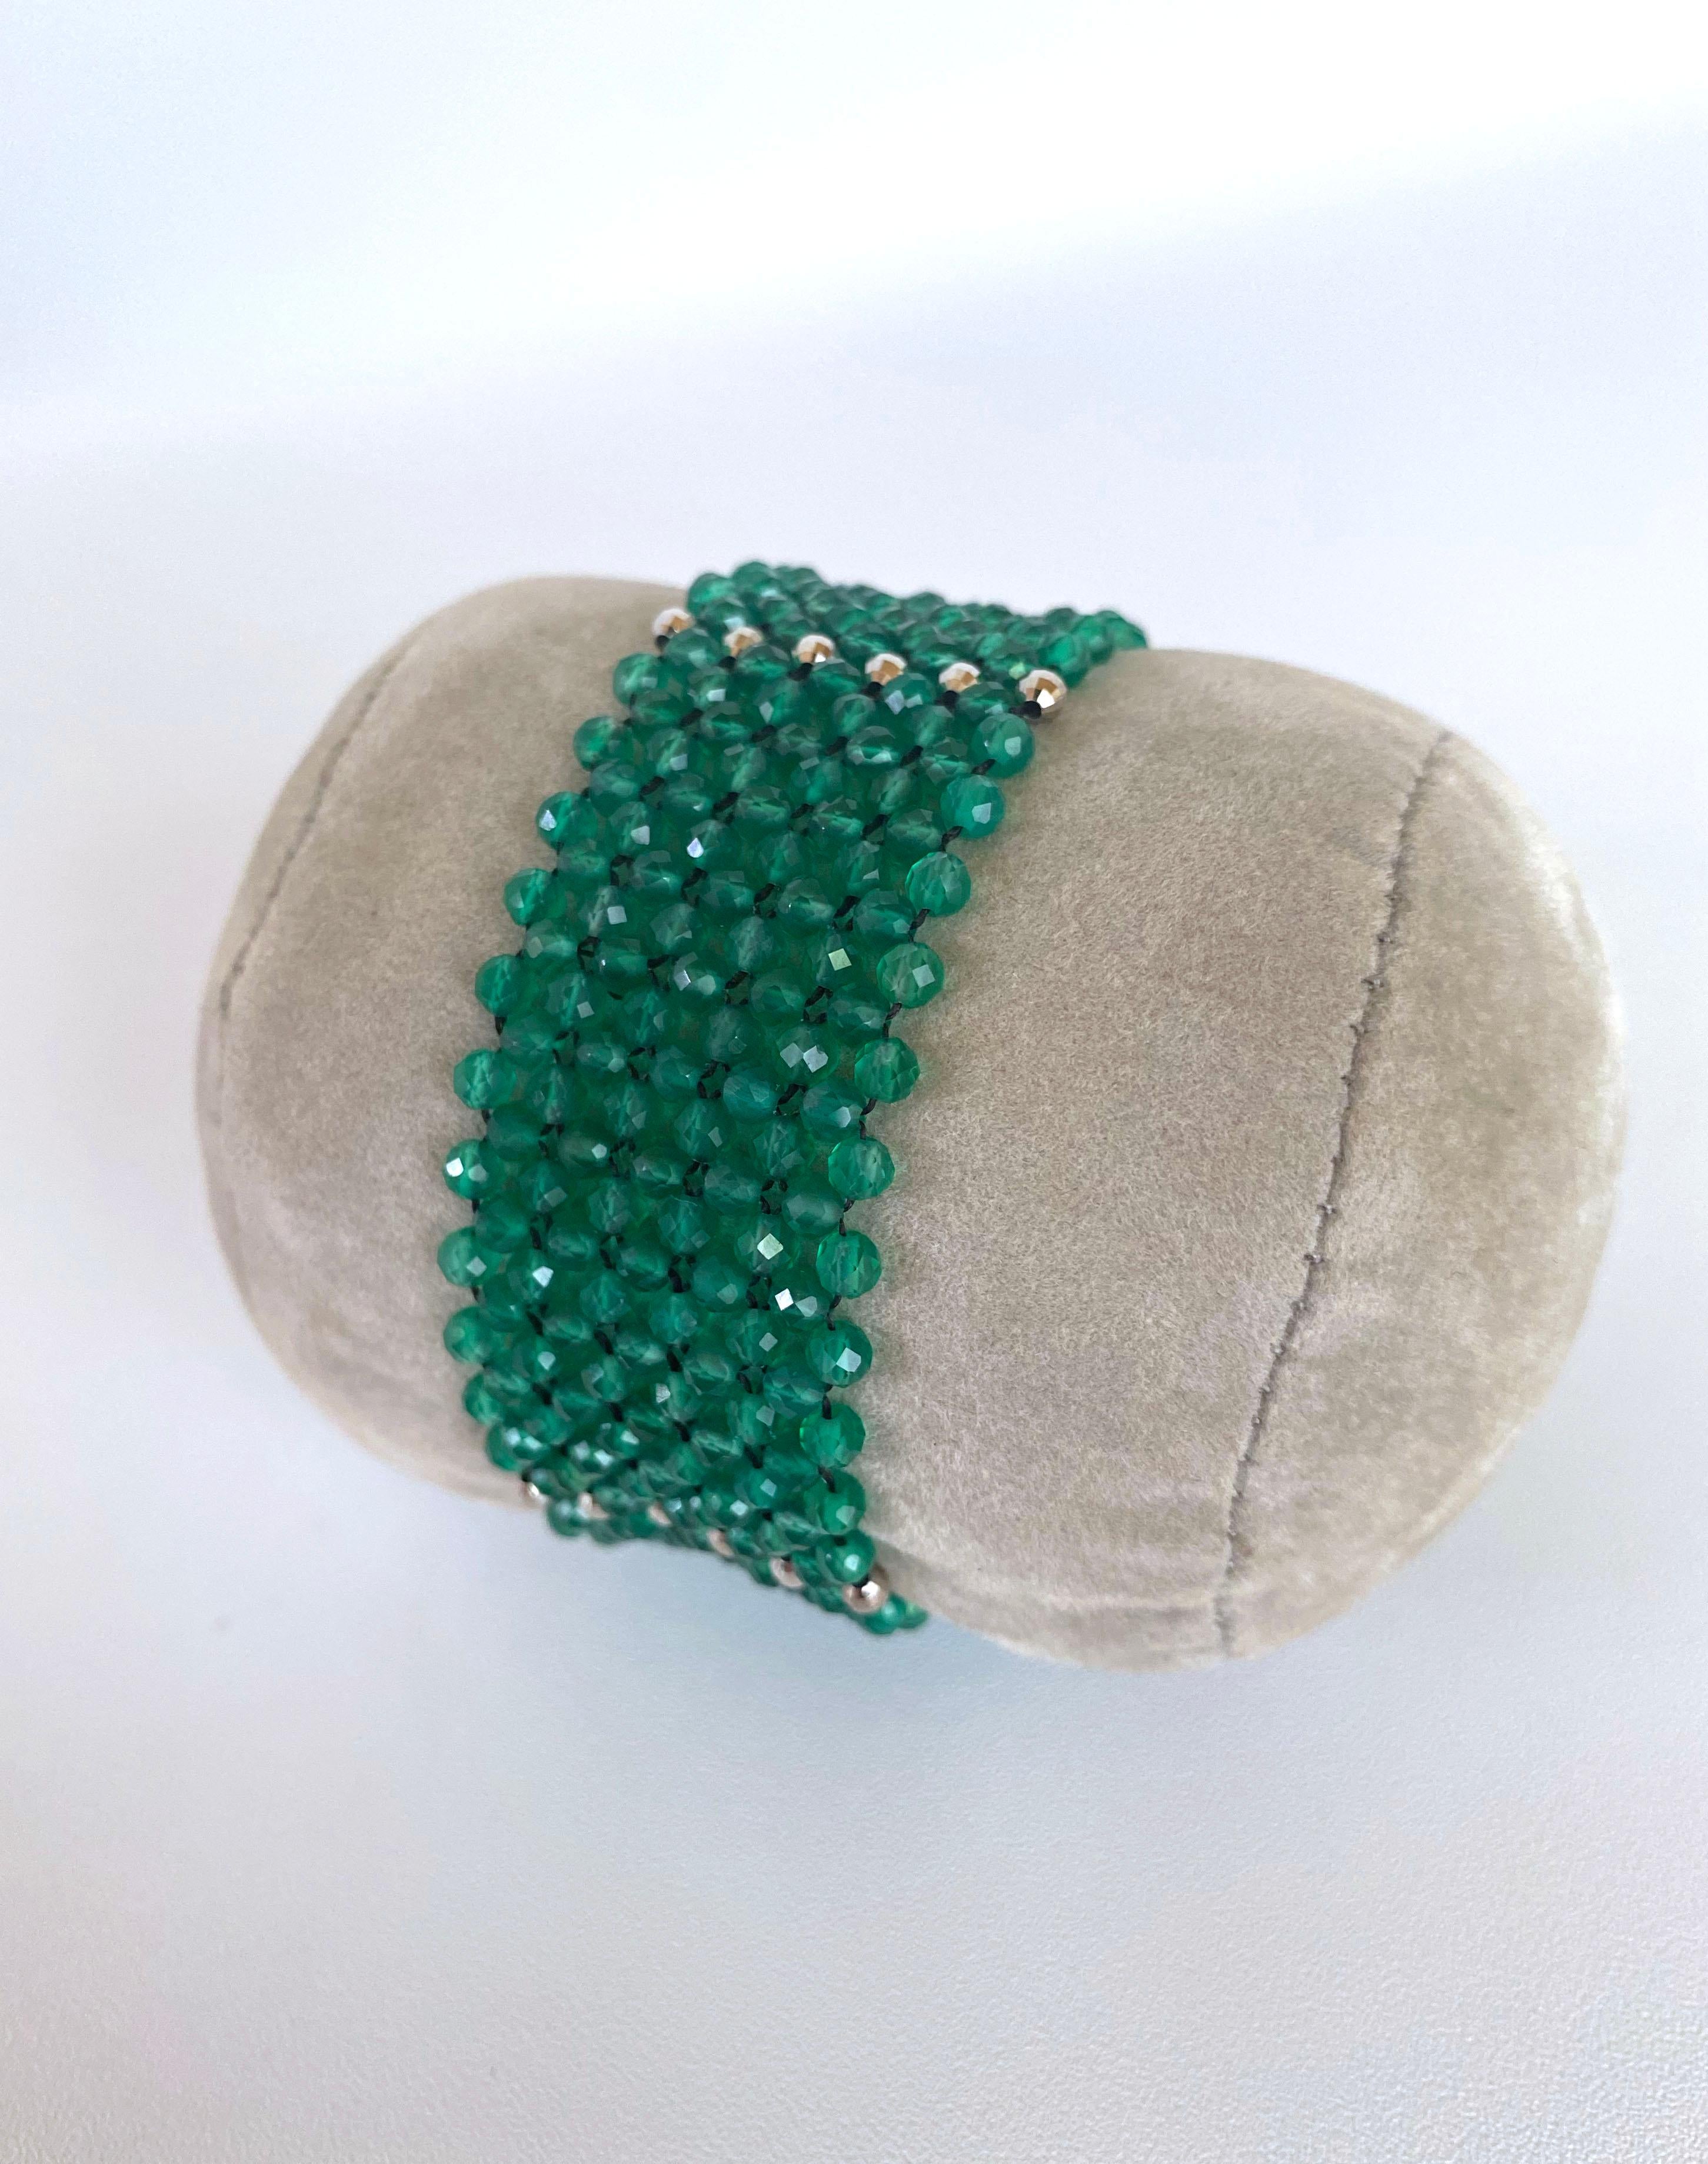 Gorgeous piece all hand woven and made by Marina J. This brilliant bracelet features amazing faceted Green Onyx beads which display a great translucency and radiance, perfectly adorned by Rhodium plated Sterling Silver accents. Measuring 6.75 inches